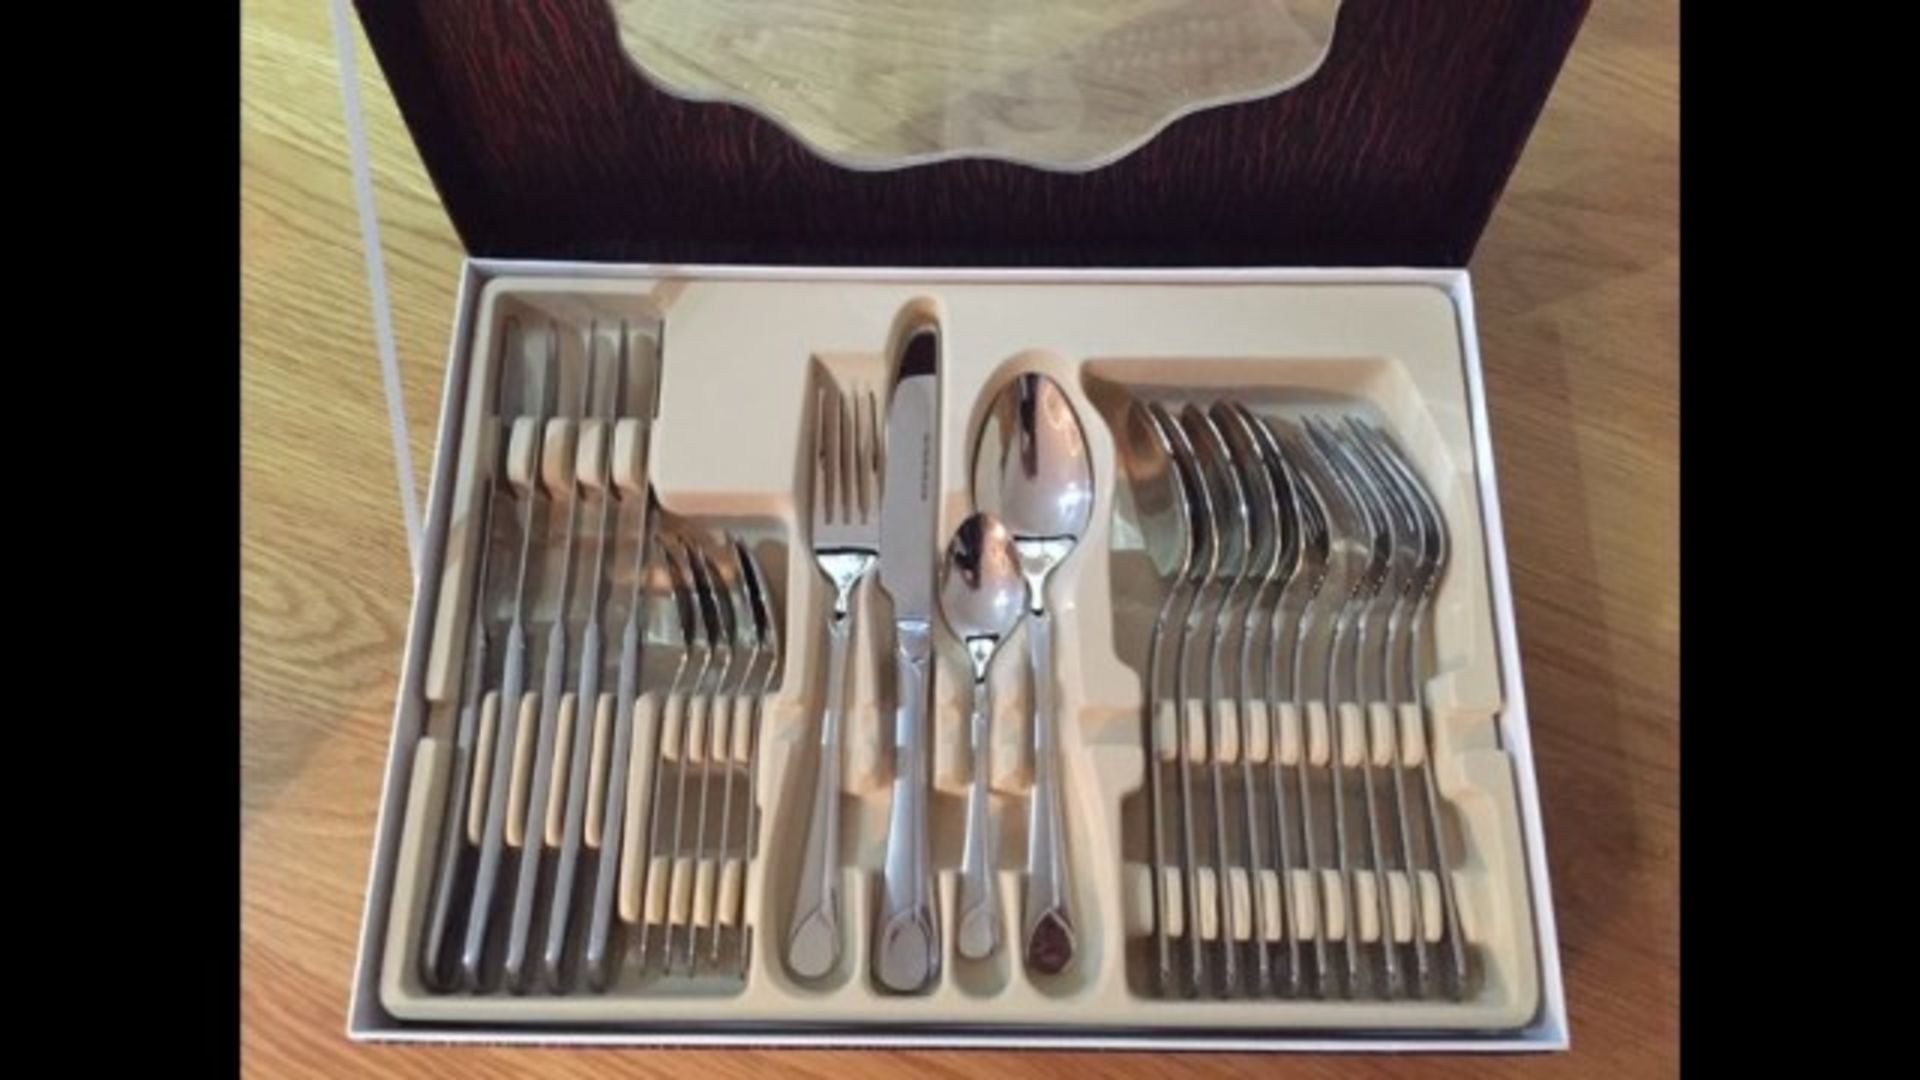 V *TRADE QTY* Brand New Waltmann & Son 24 Piece Polished Stainless Steel And Satin Finish Cutlery